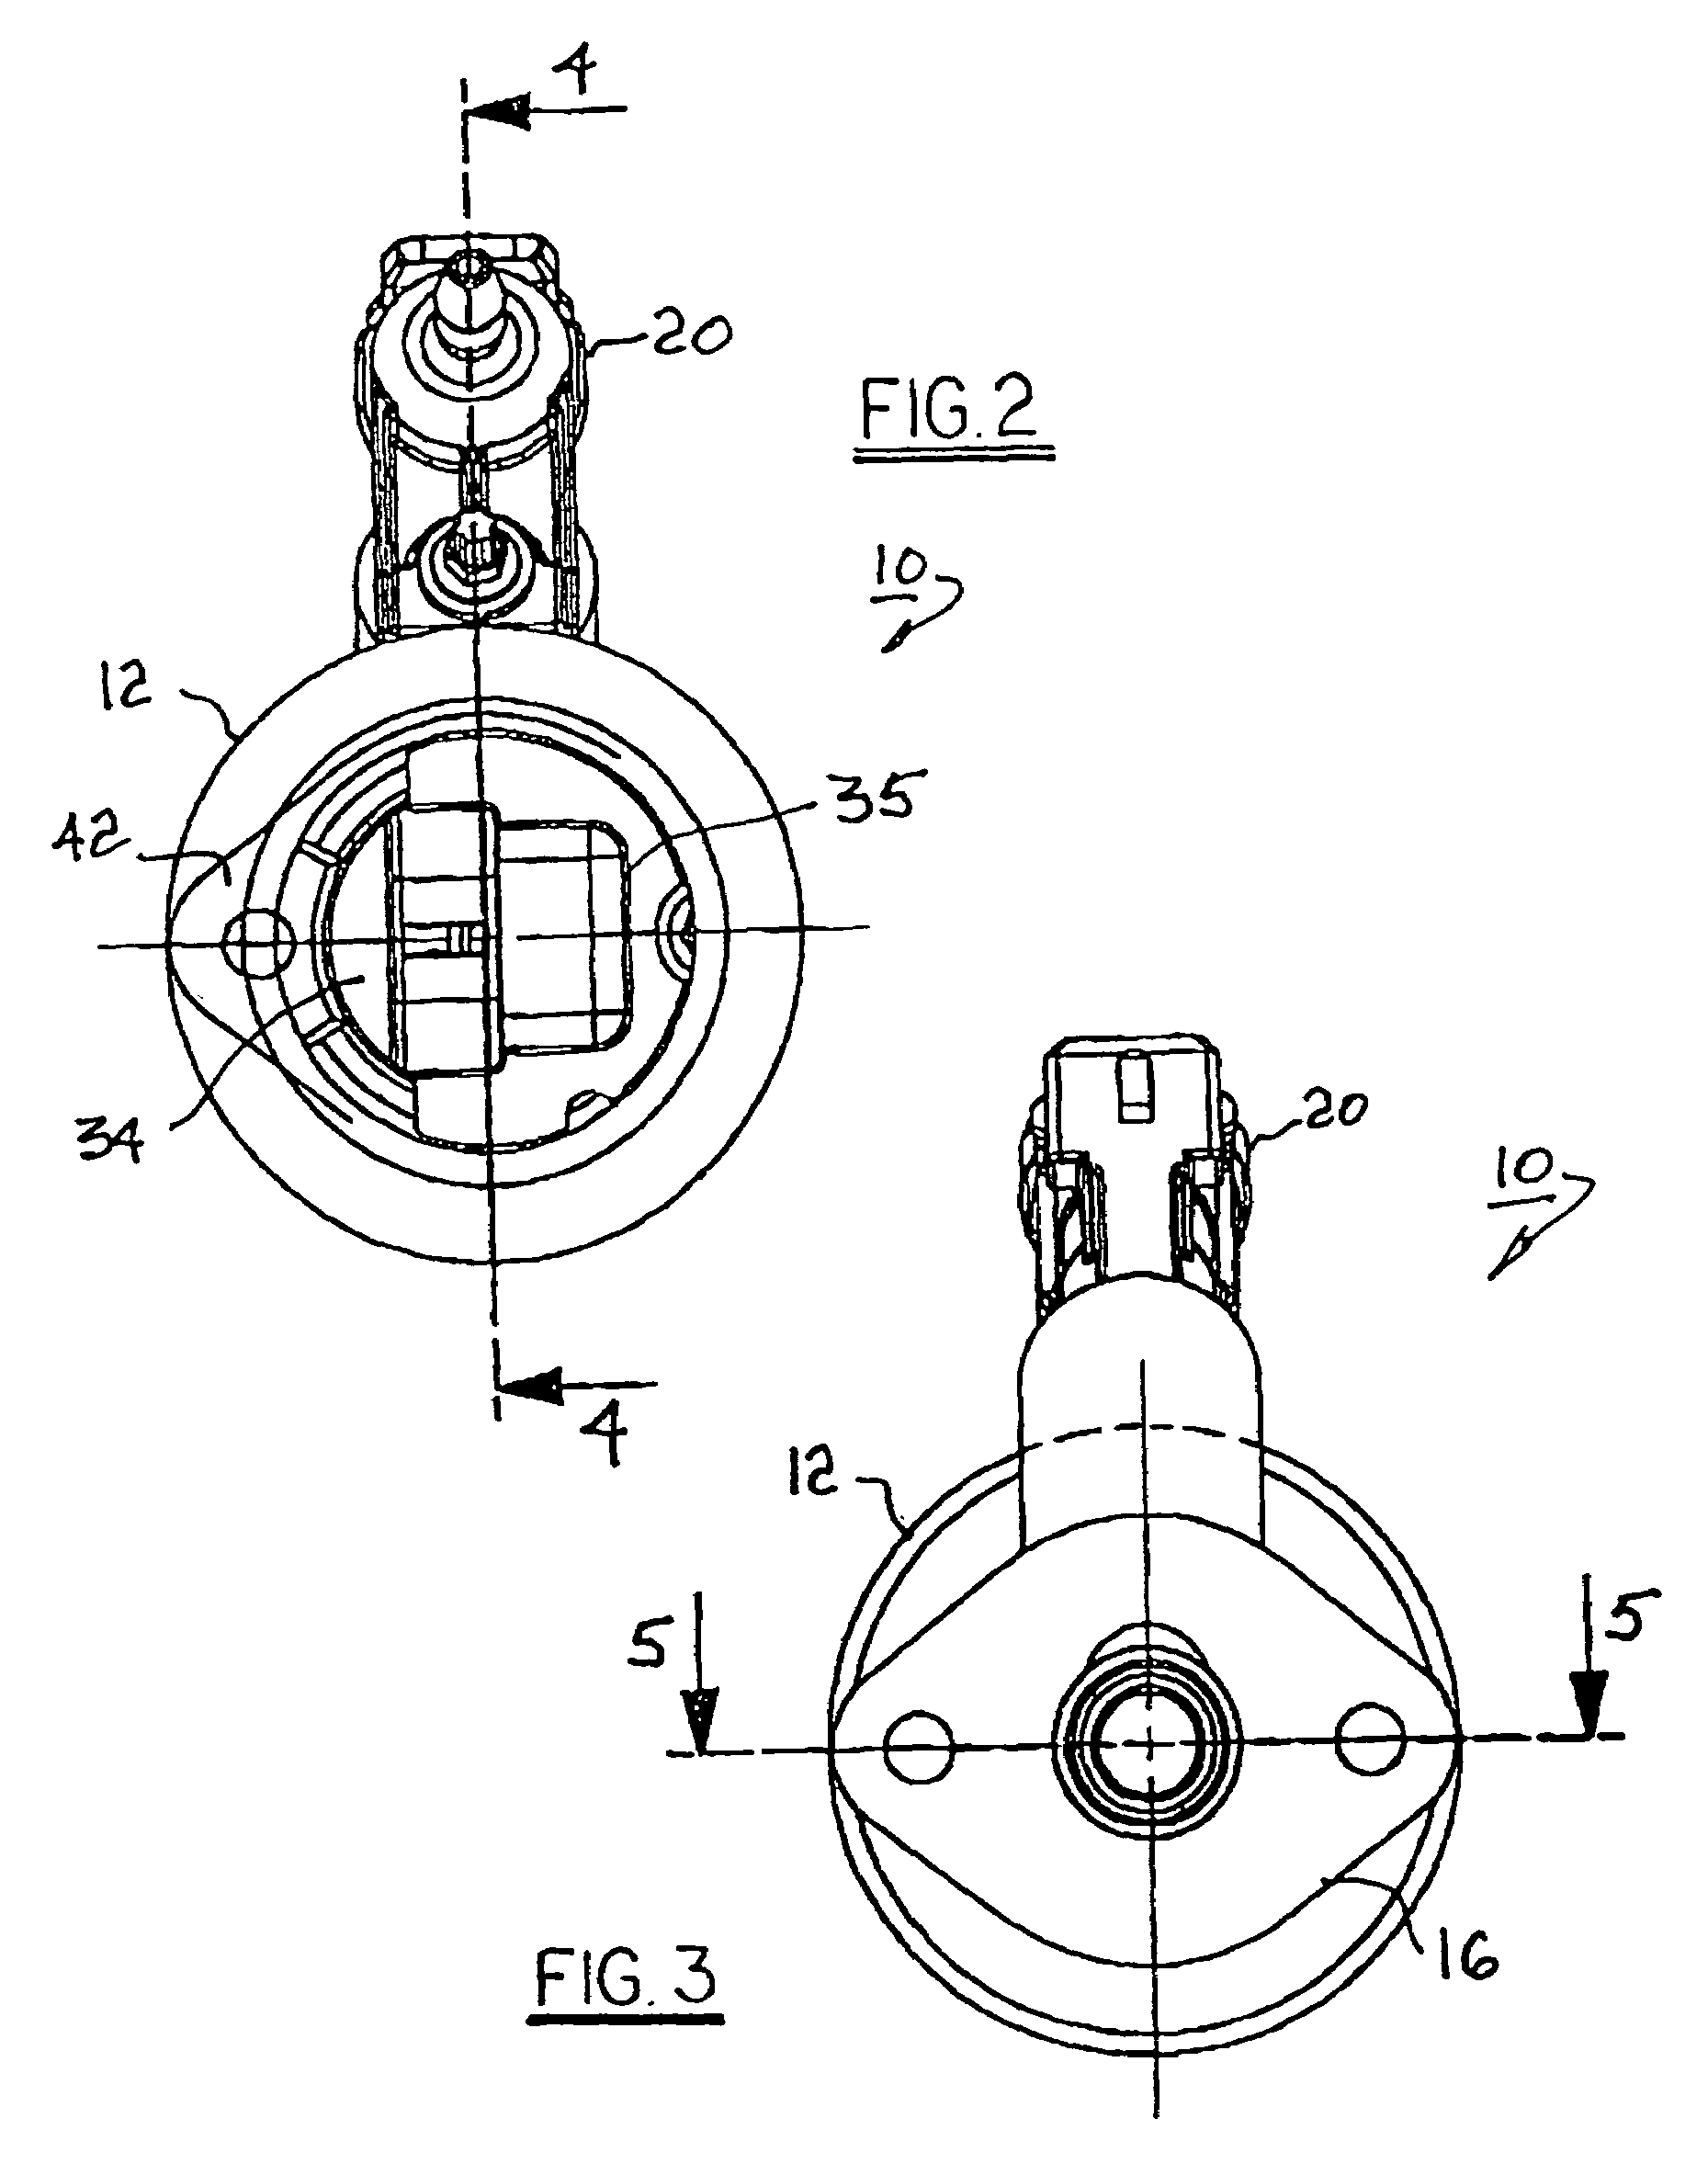 Throttle control for a small engine